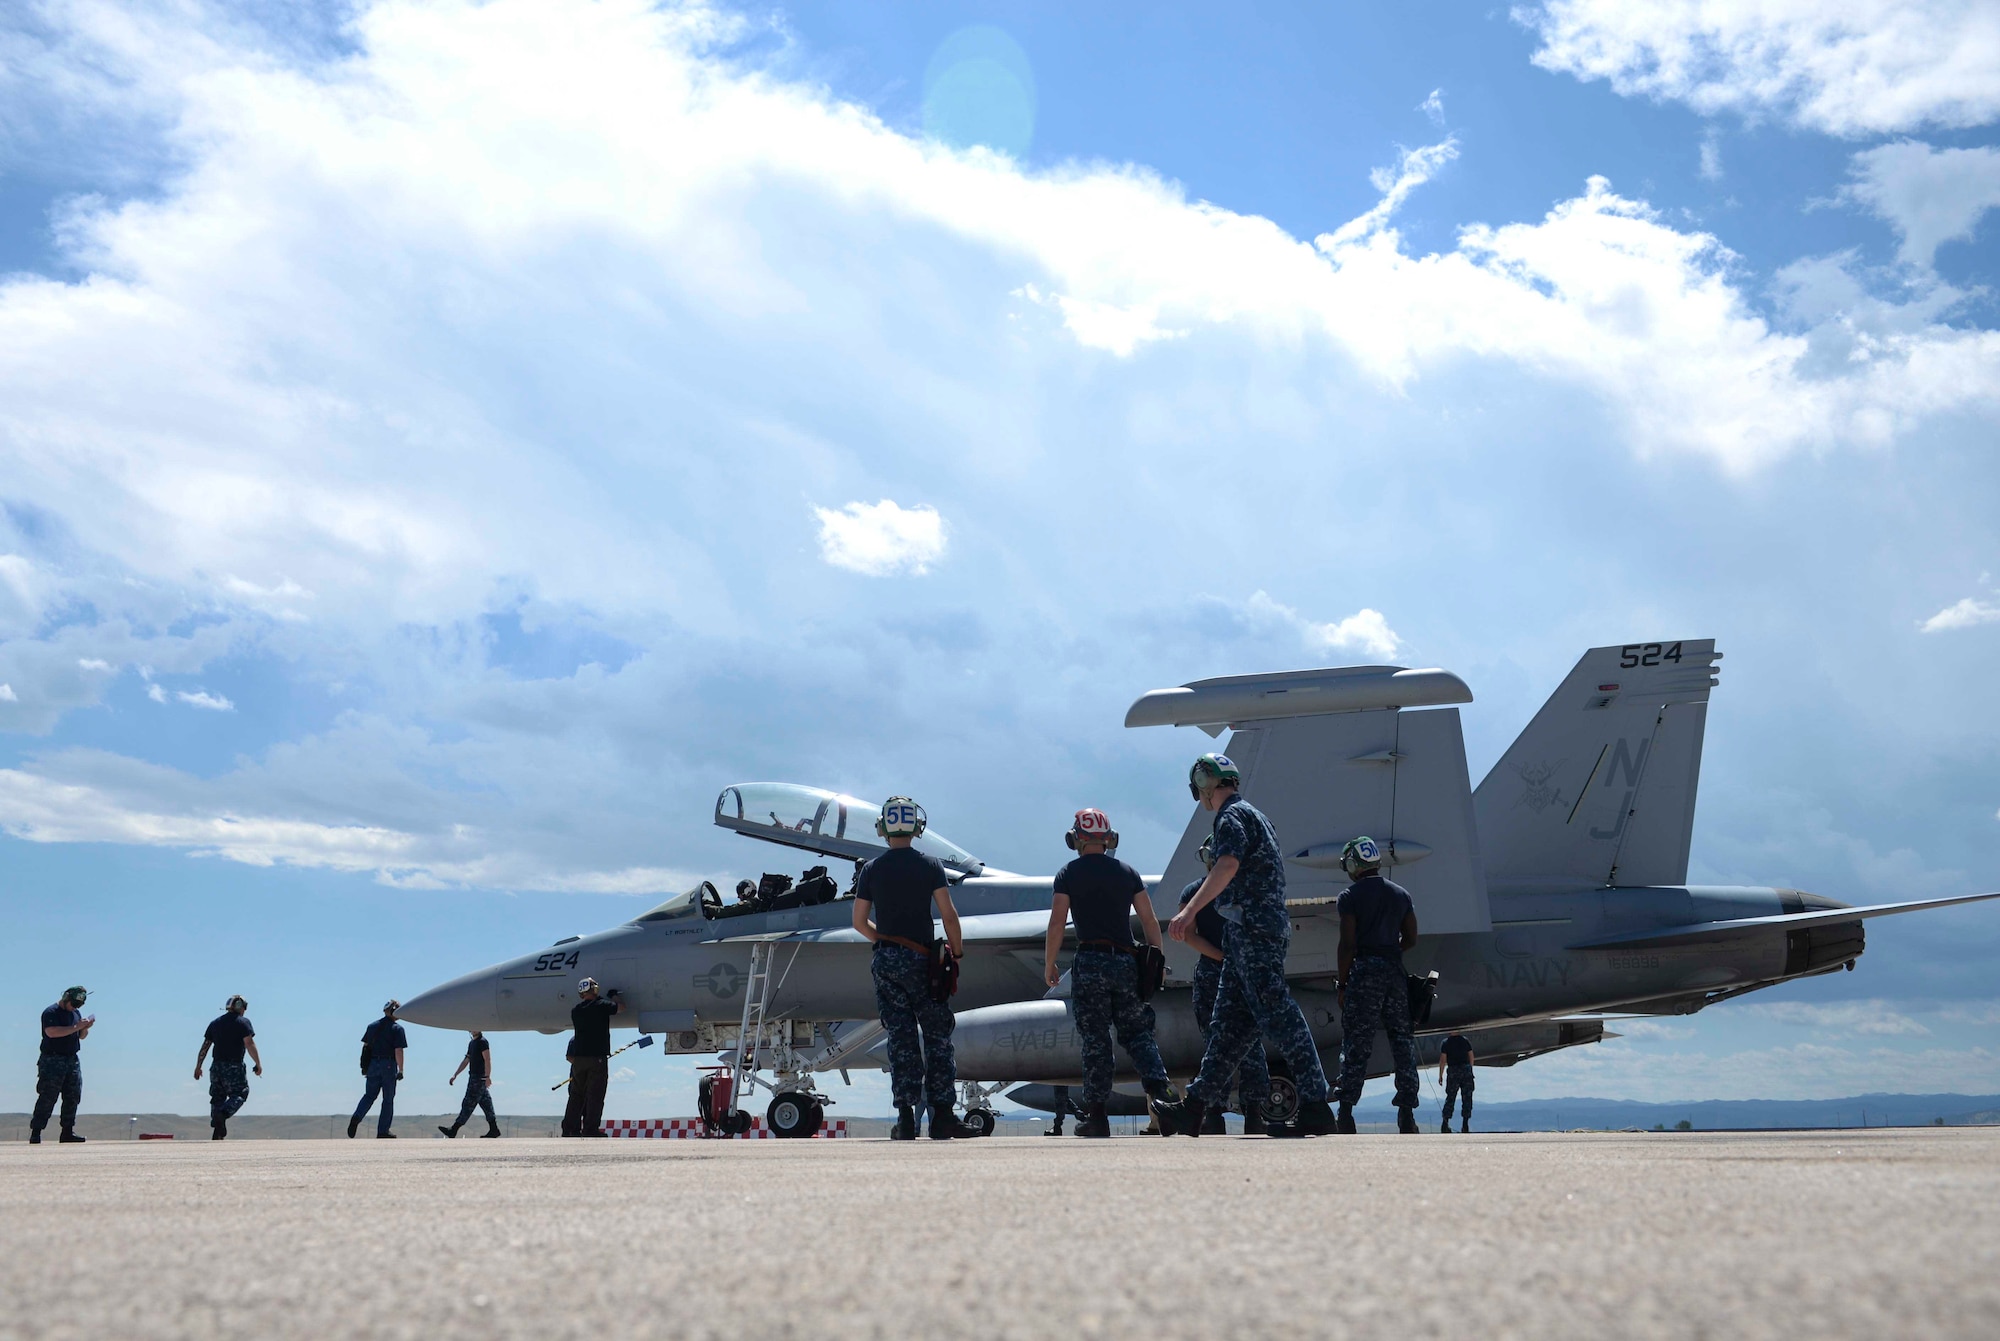 Navy maintenance personnel from Electronic Attack Squadron (VAQ) 129, assigned to Naval Air Station Whidbey Island, Wash., conduct a preflight check on an EA-18G Growler before a training flight at Ellsworth Air Force Base, S.D., July 15, 2016. Approximately 110 Sailors participated in the training, maintaining six EA-18G Growlers and focusing on airborne electronic attack tactics. (U.S. Air Force photo by Airman 1st Class Sadie Colbert/Released)